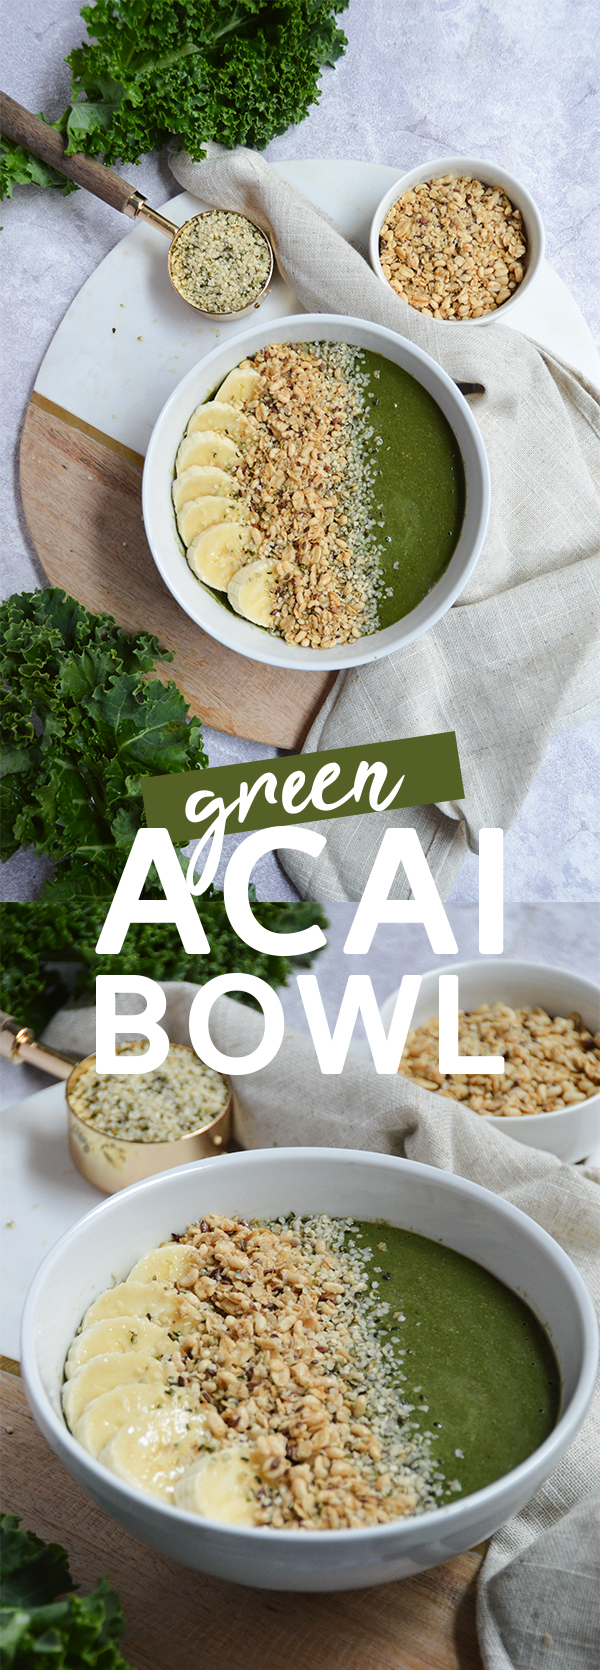 Acai bowls have supplanted kale chips as the health food world's biggest  nutritional darling.